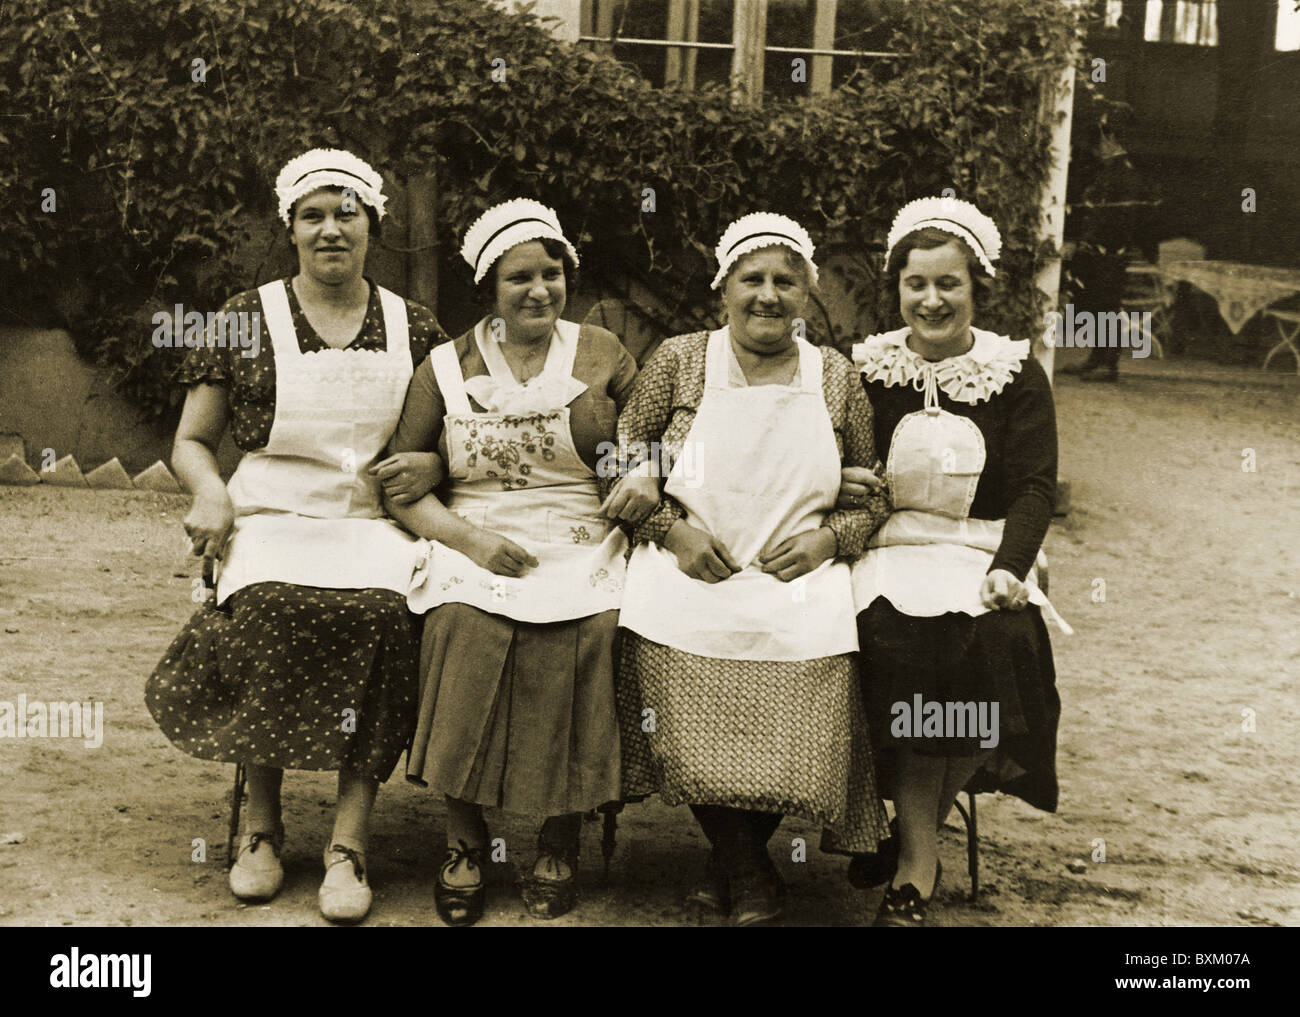 people, professions, maidservant, group picture, circa 1929, Additional-Rights-Clearences-Not Available Stock Photo